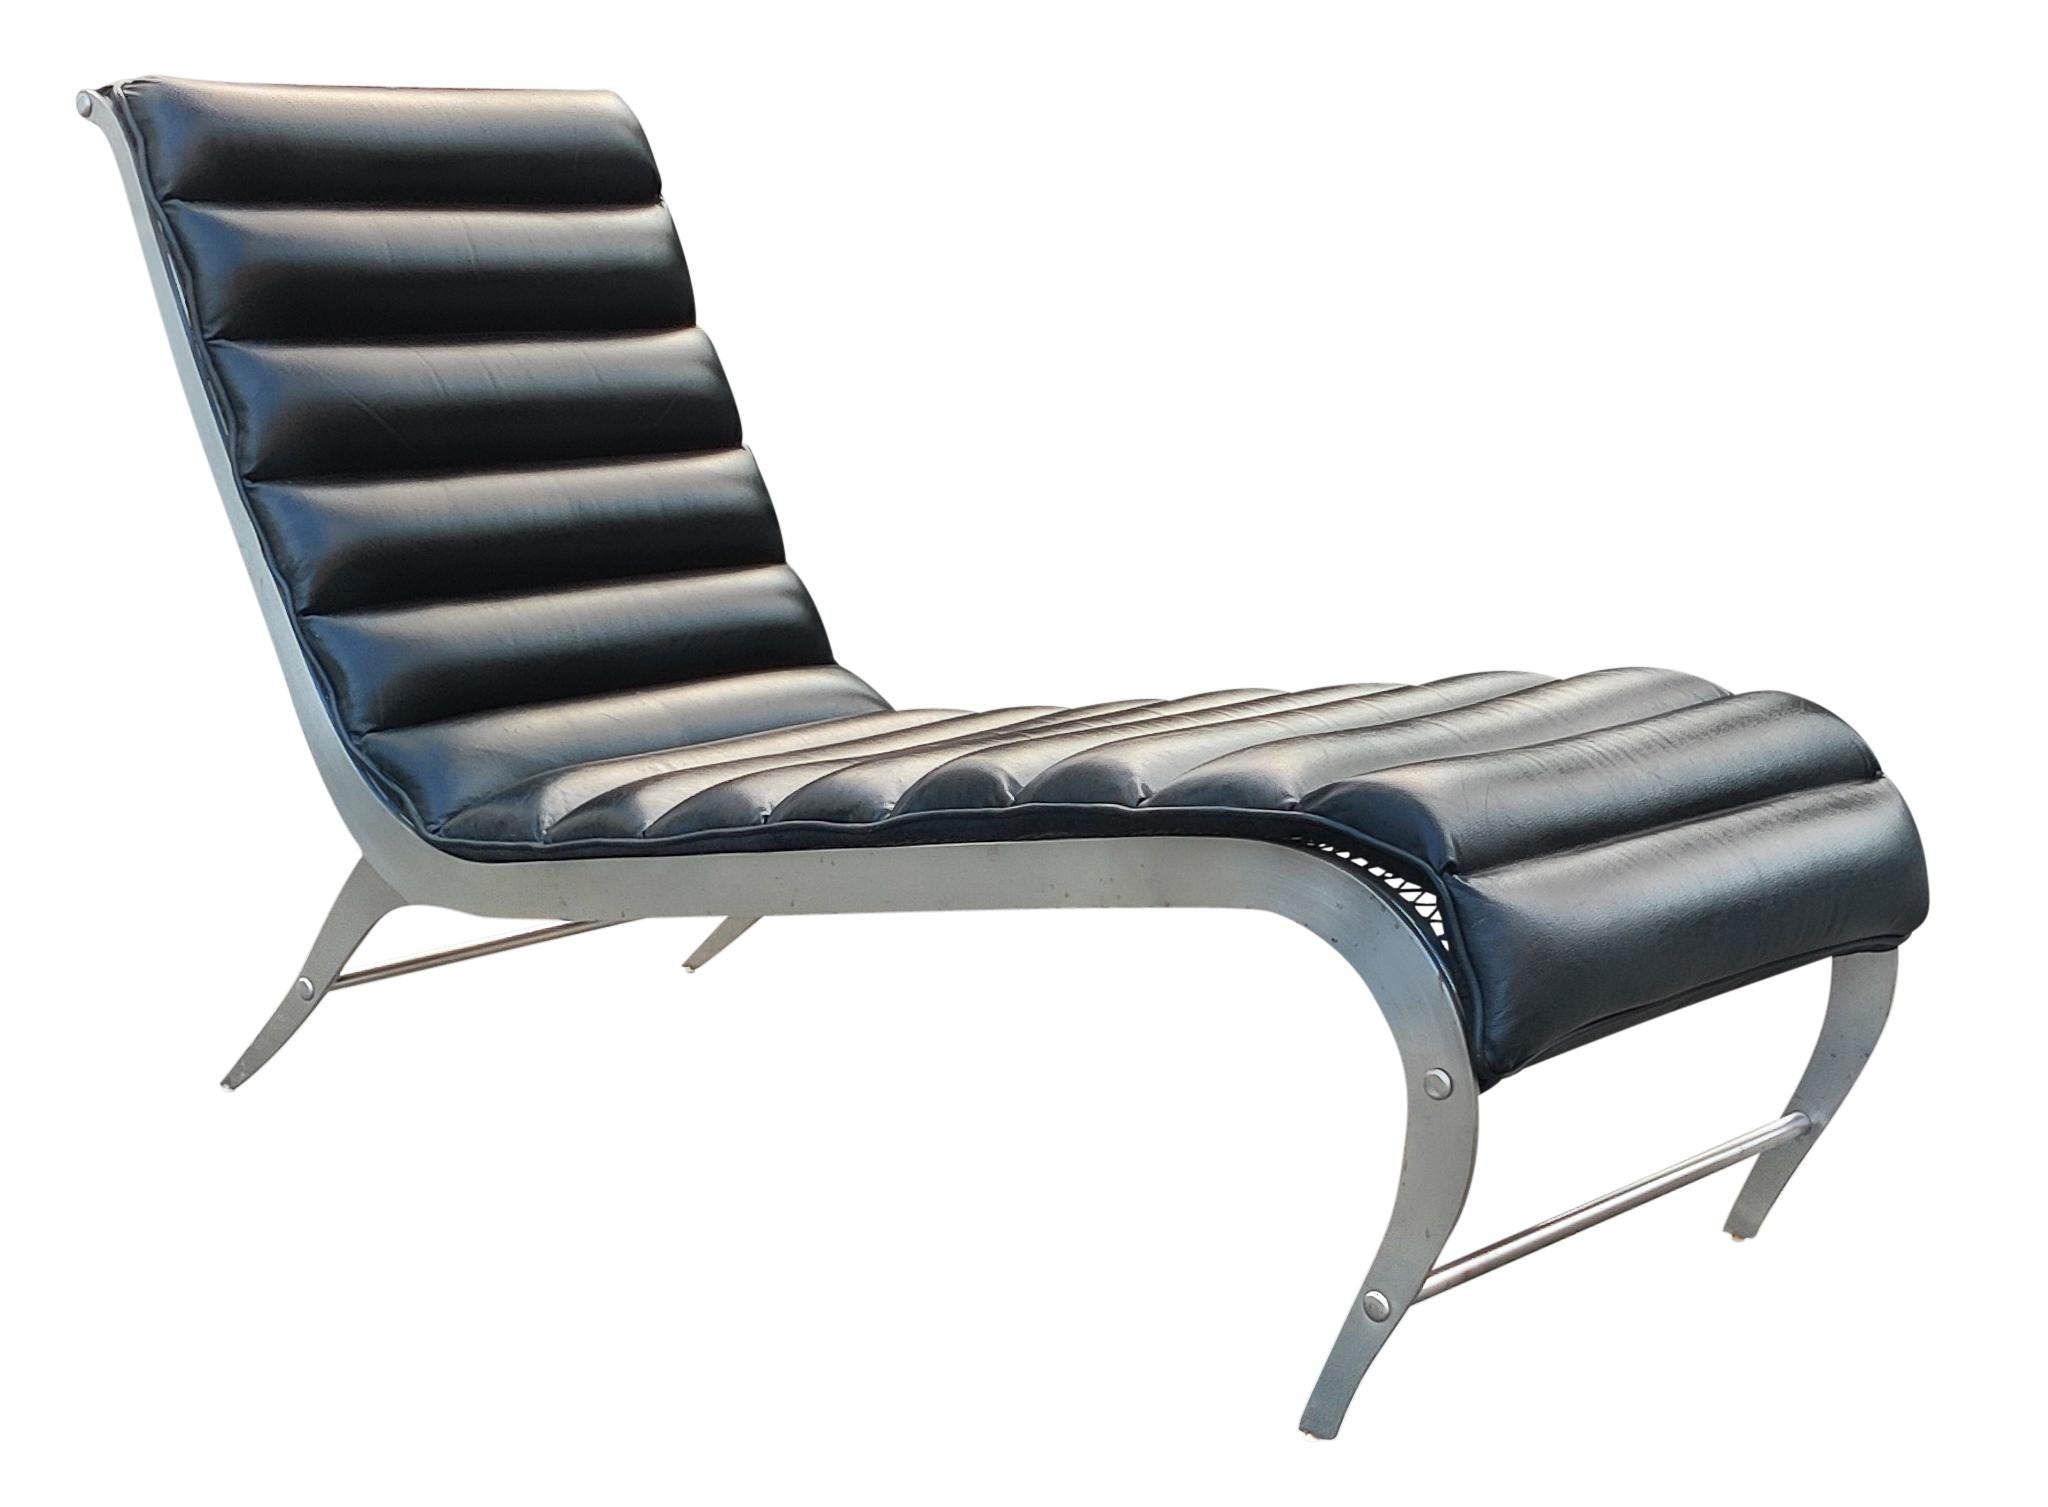 In the elegant style of the 1940s creations by Gio Ponti, this curvaceous mid-century and Vintage chaise lounge is stamped on the right rear leg - 